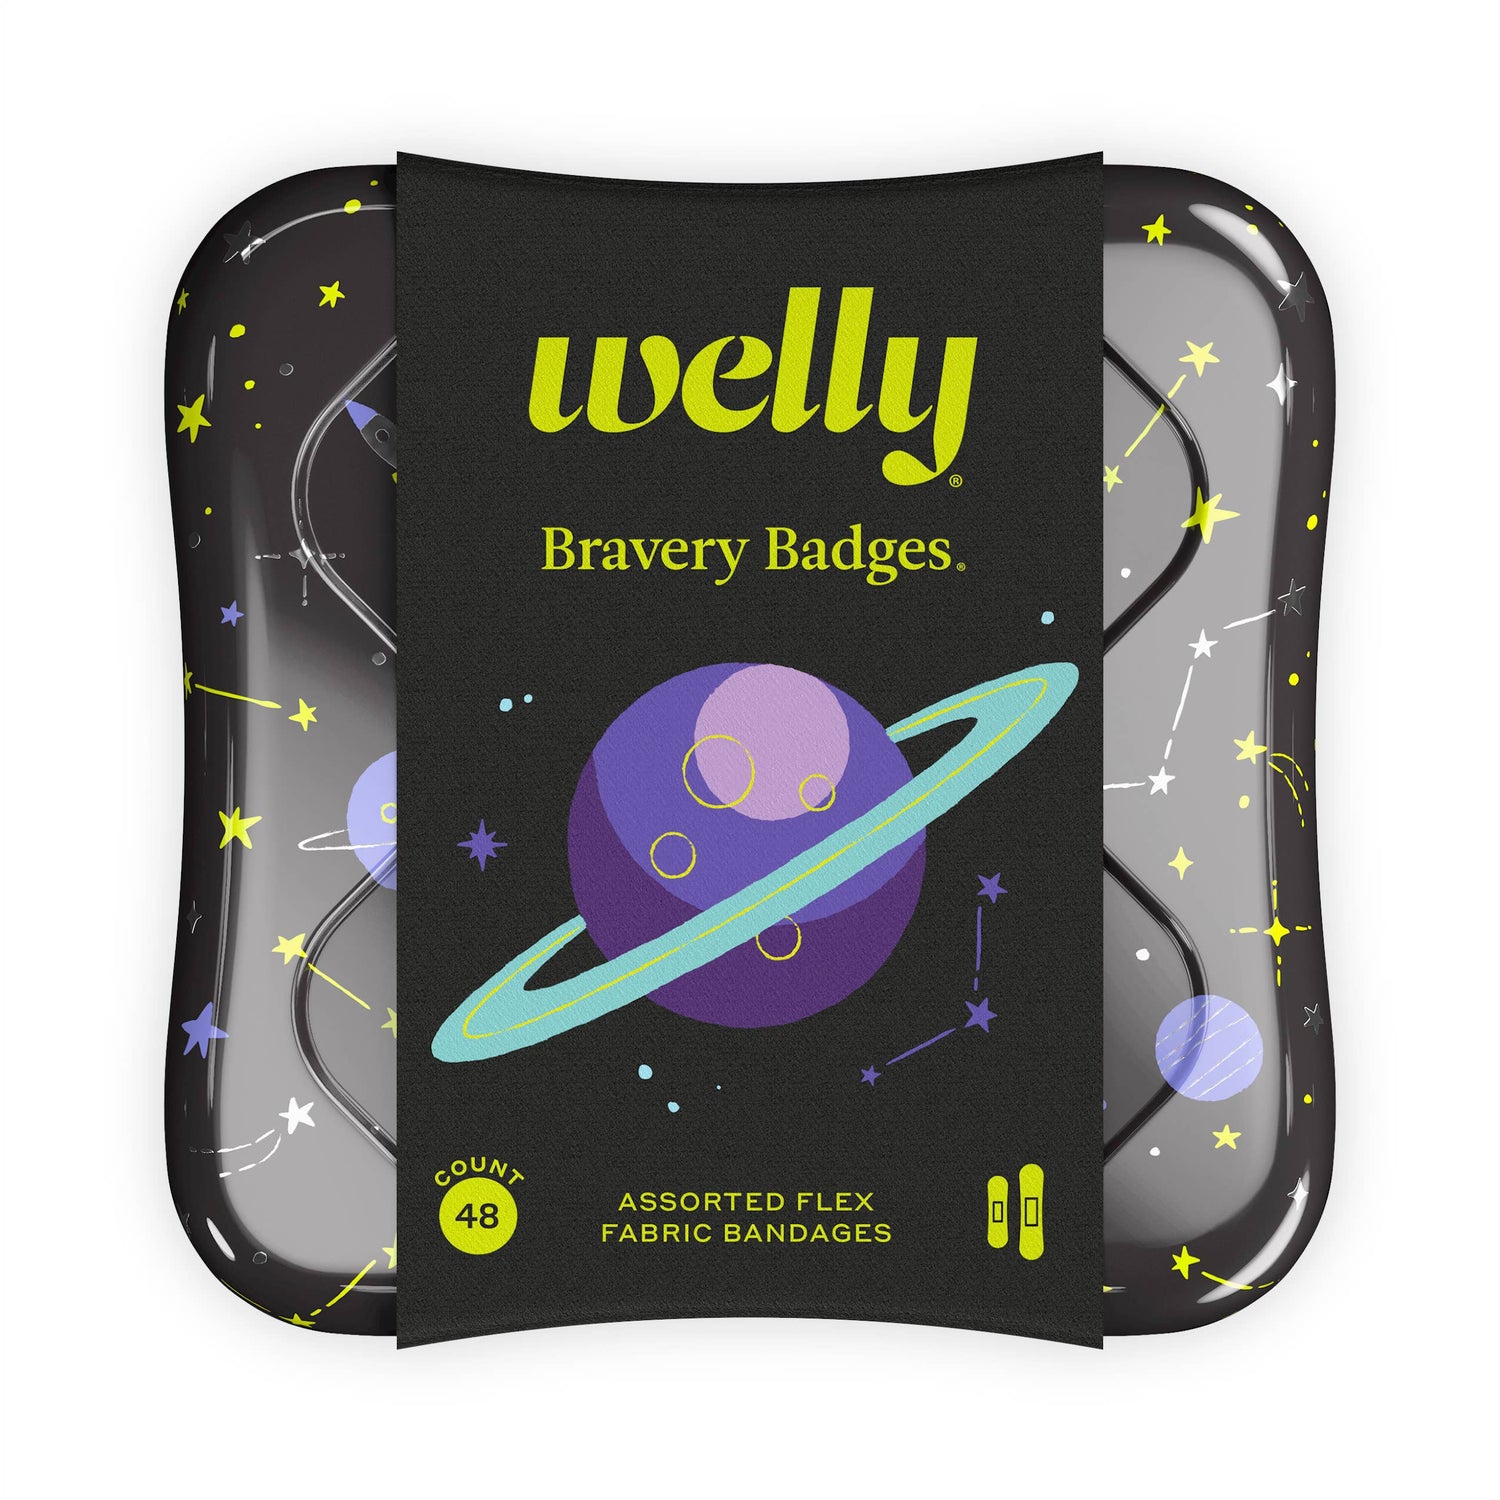 Space Bravery Badges bandage 48 pack by Welly